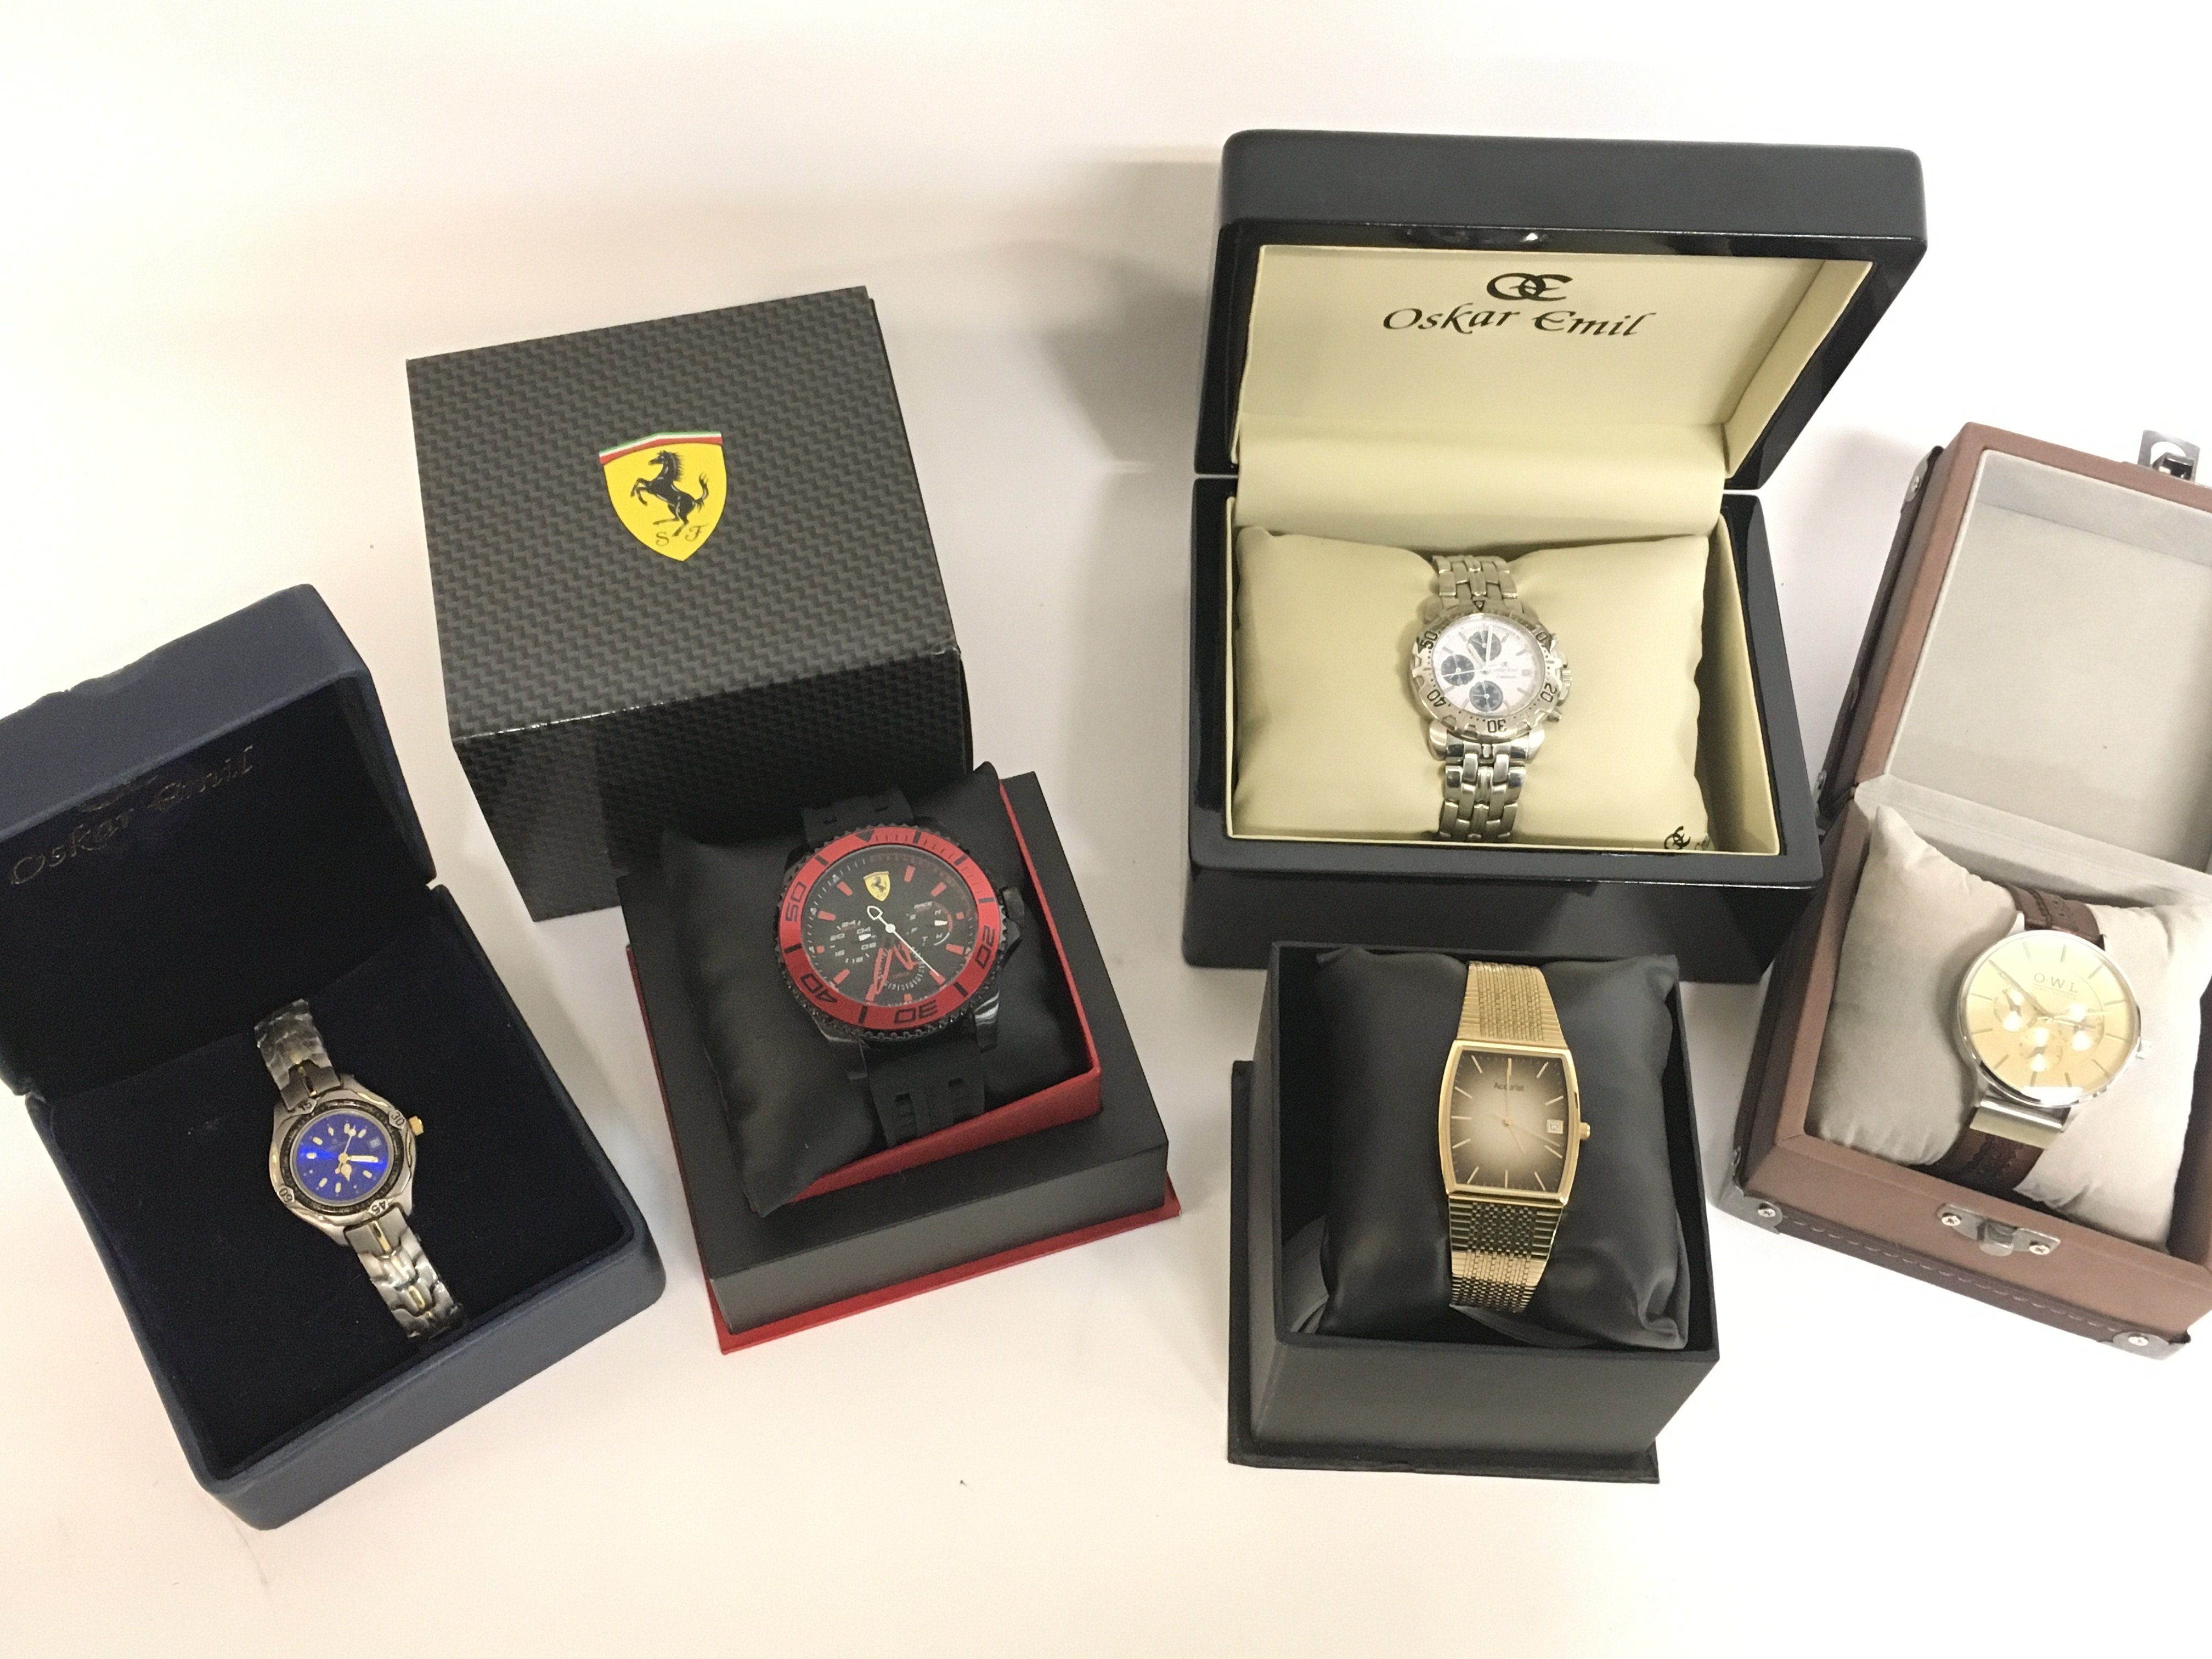 A collection of boxed watches including Oskar Emil